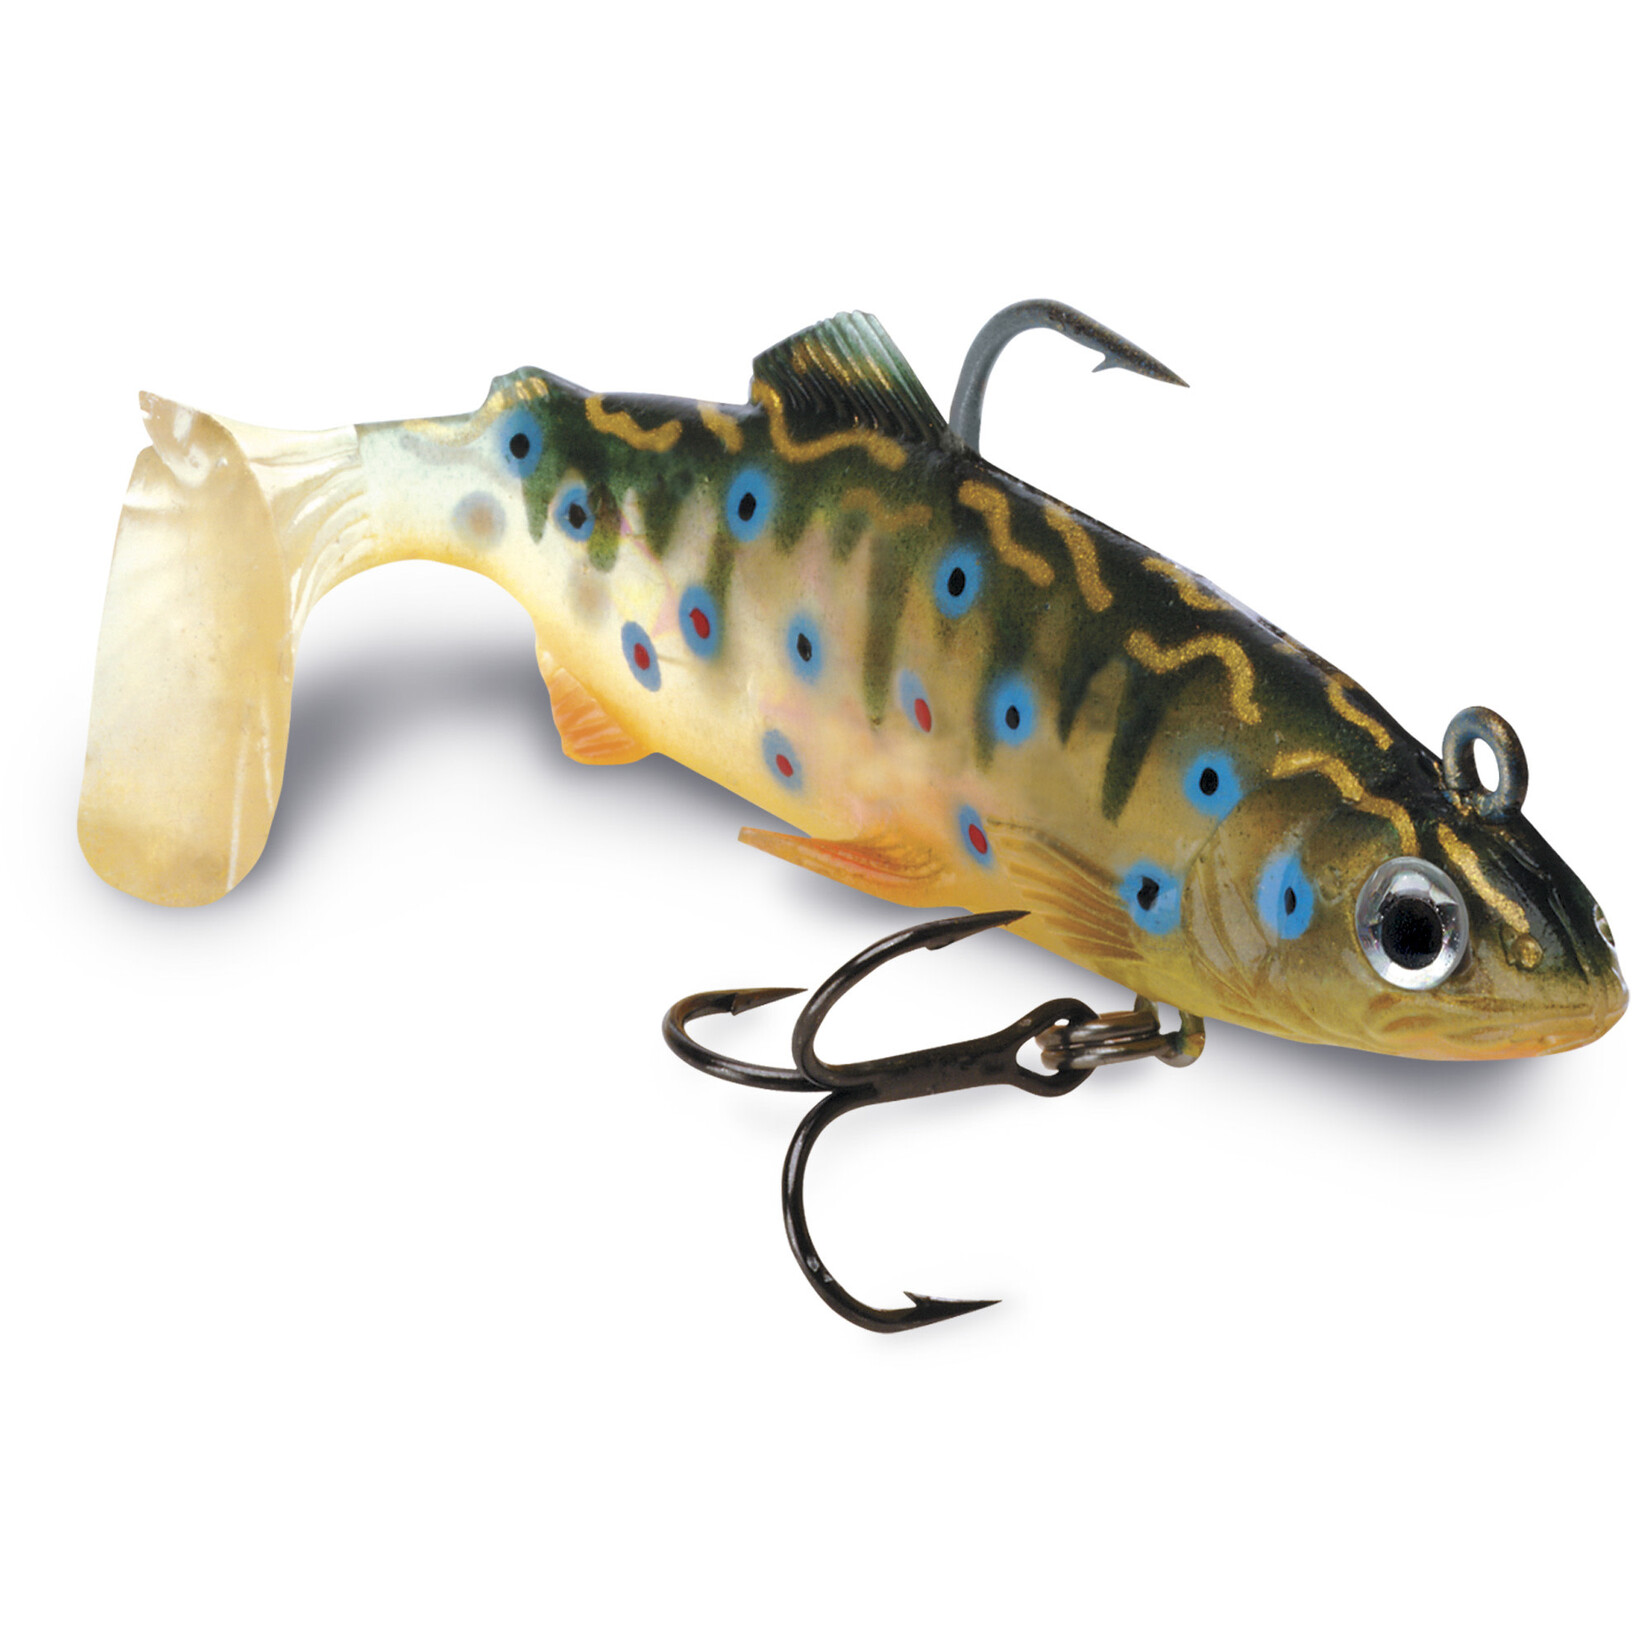 Storm WildEye LiveBrook Trout 2 - Backcountry Supplies